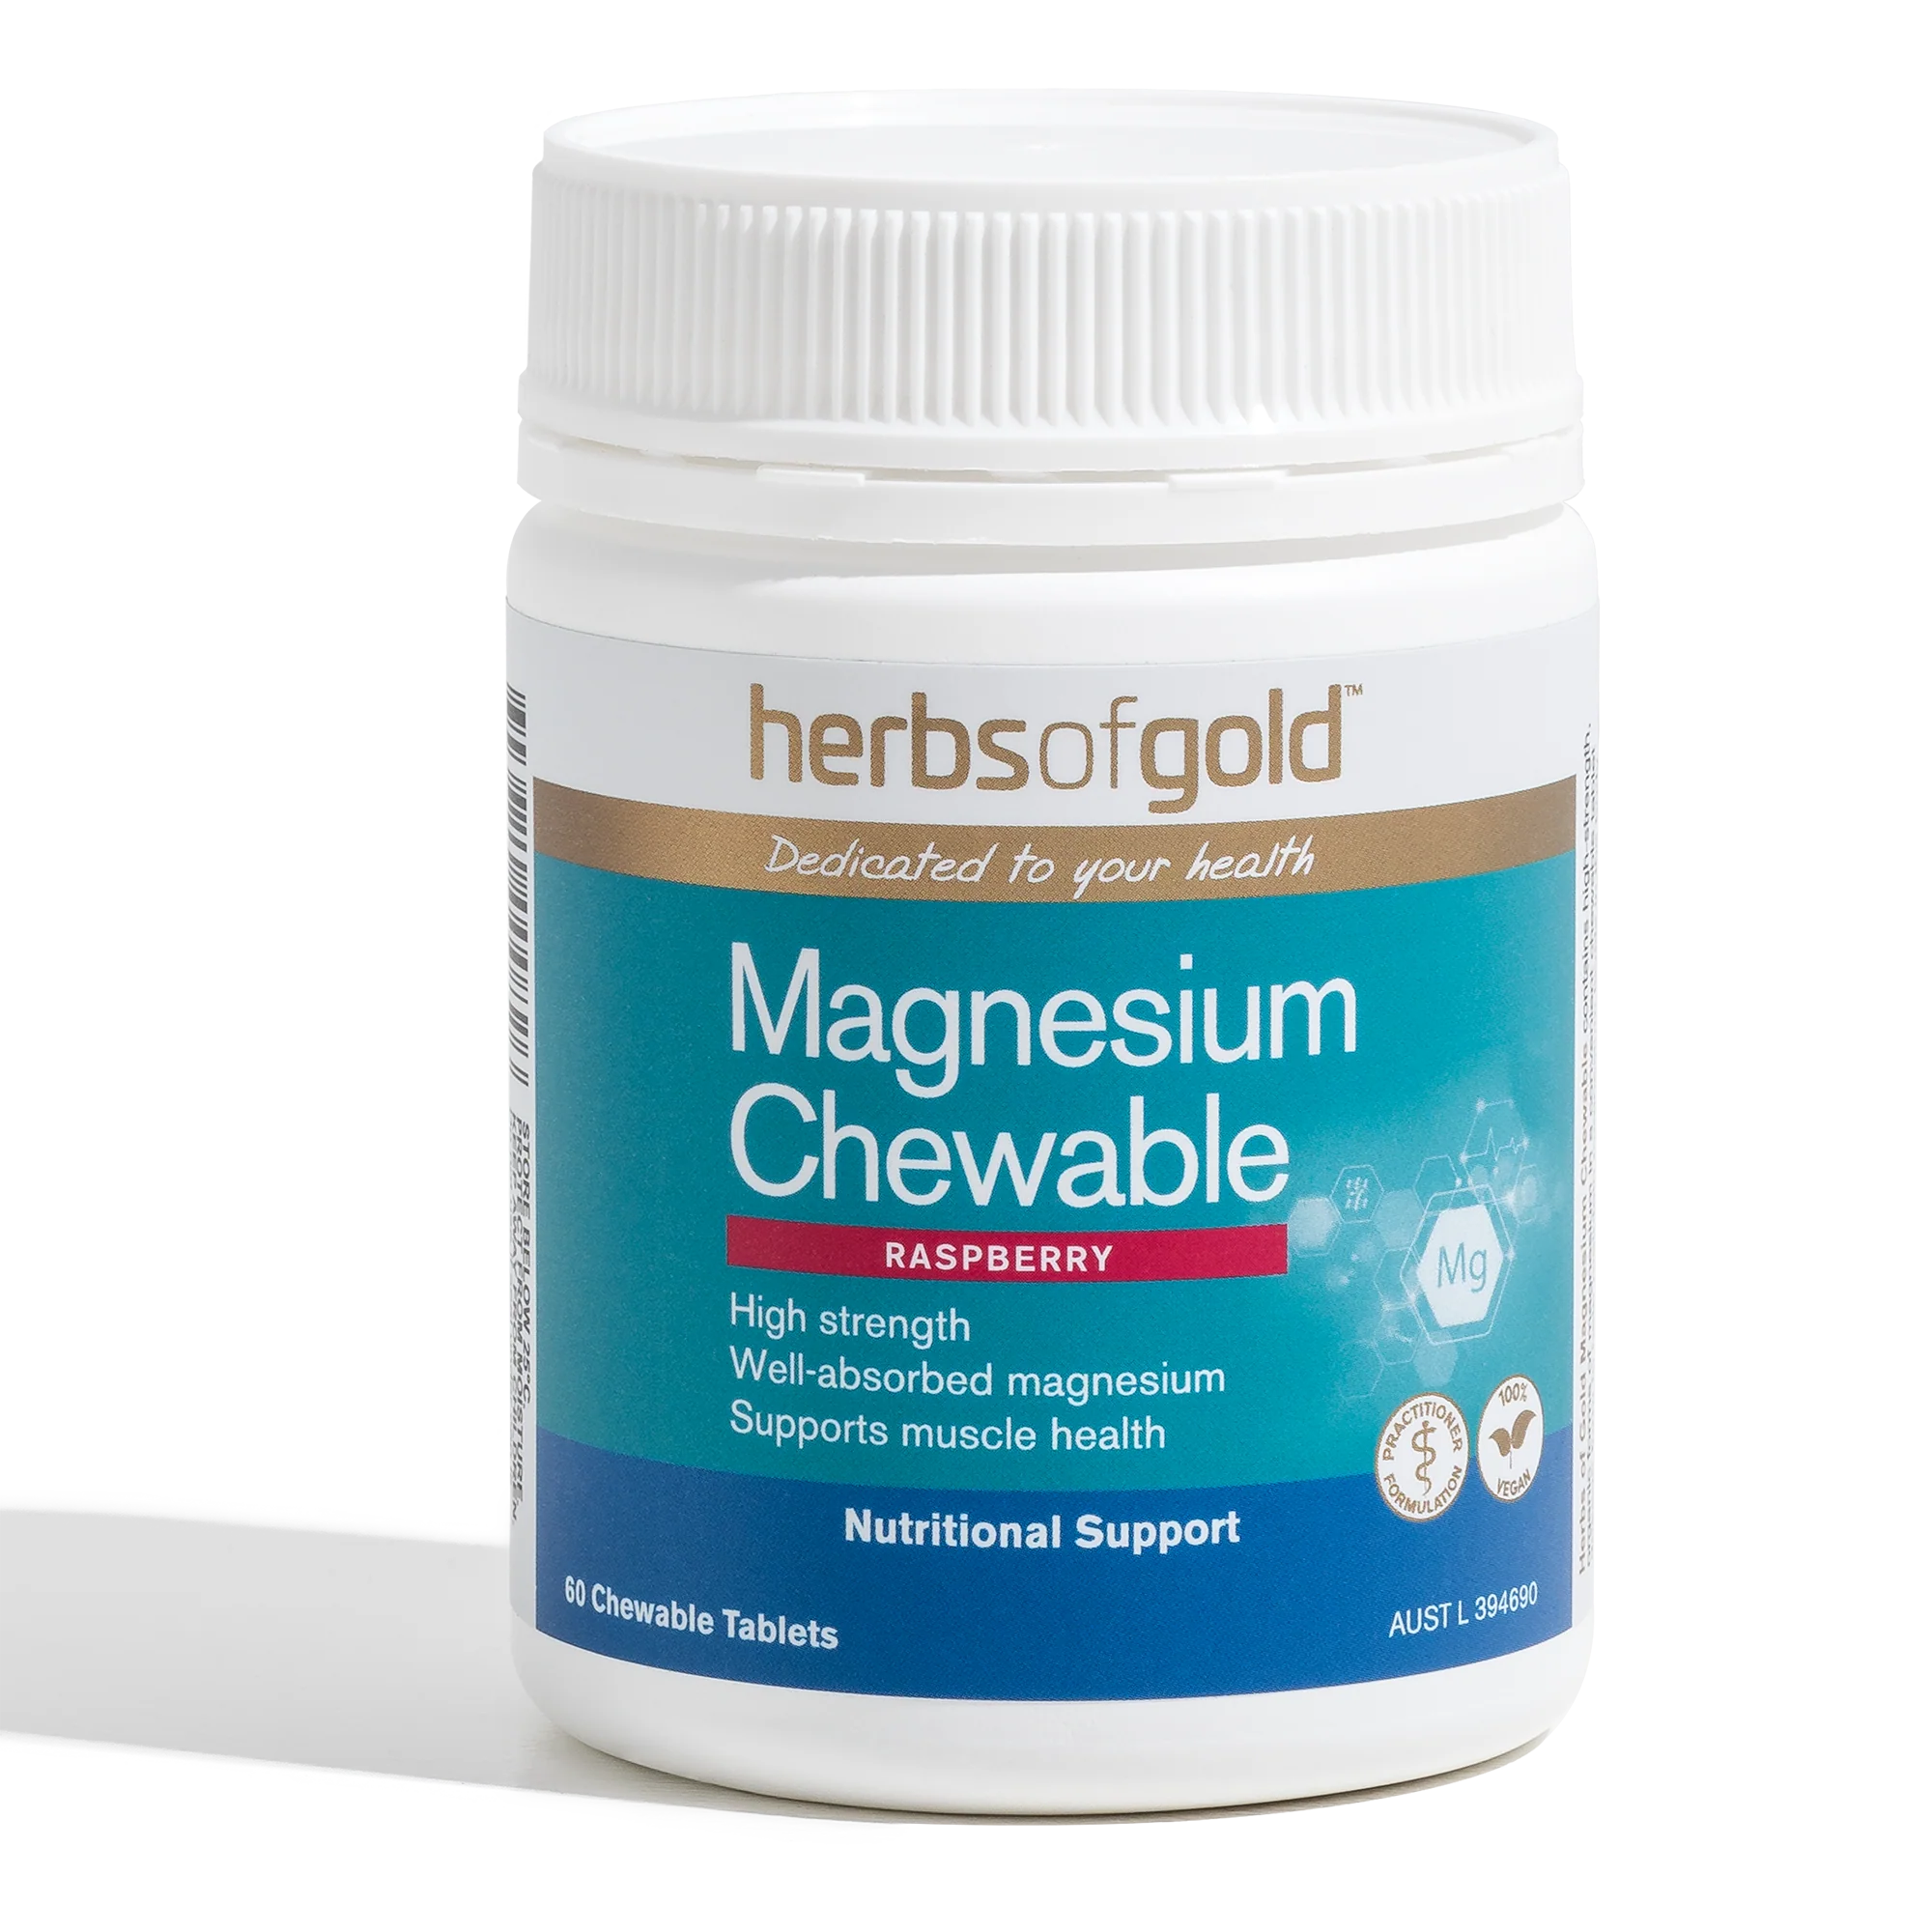 Magnesium Chewable // Supports Muscle Health (Raspberry)